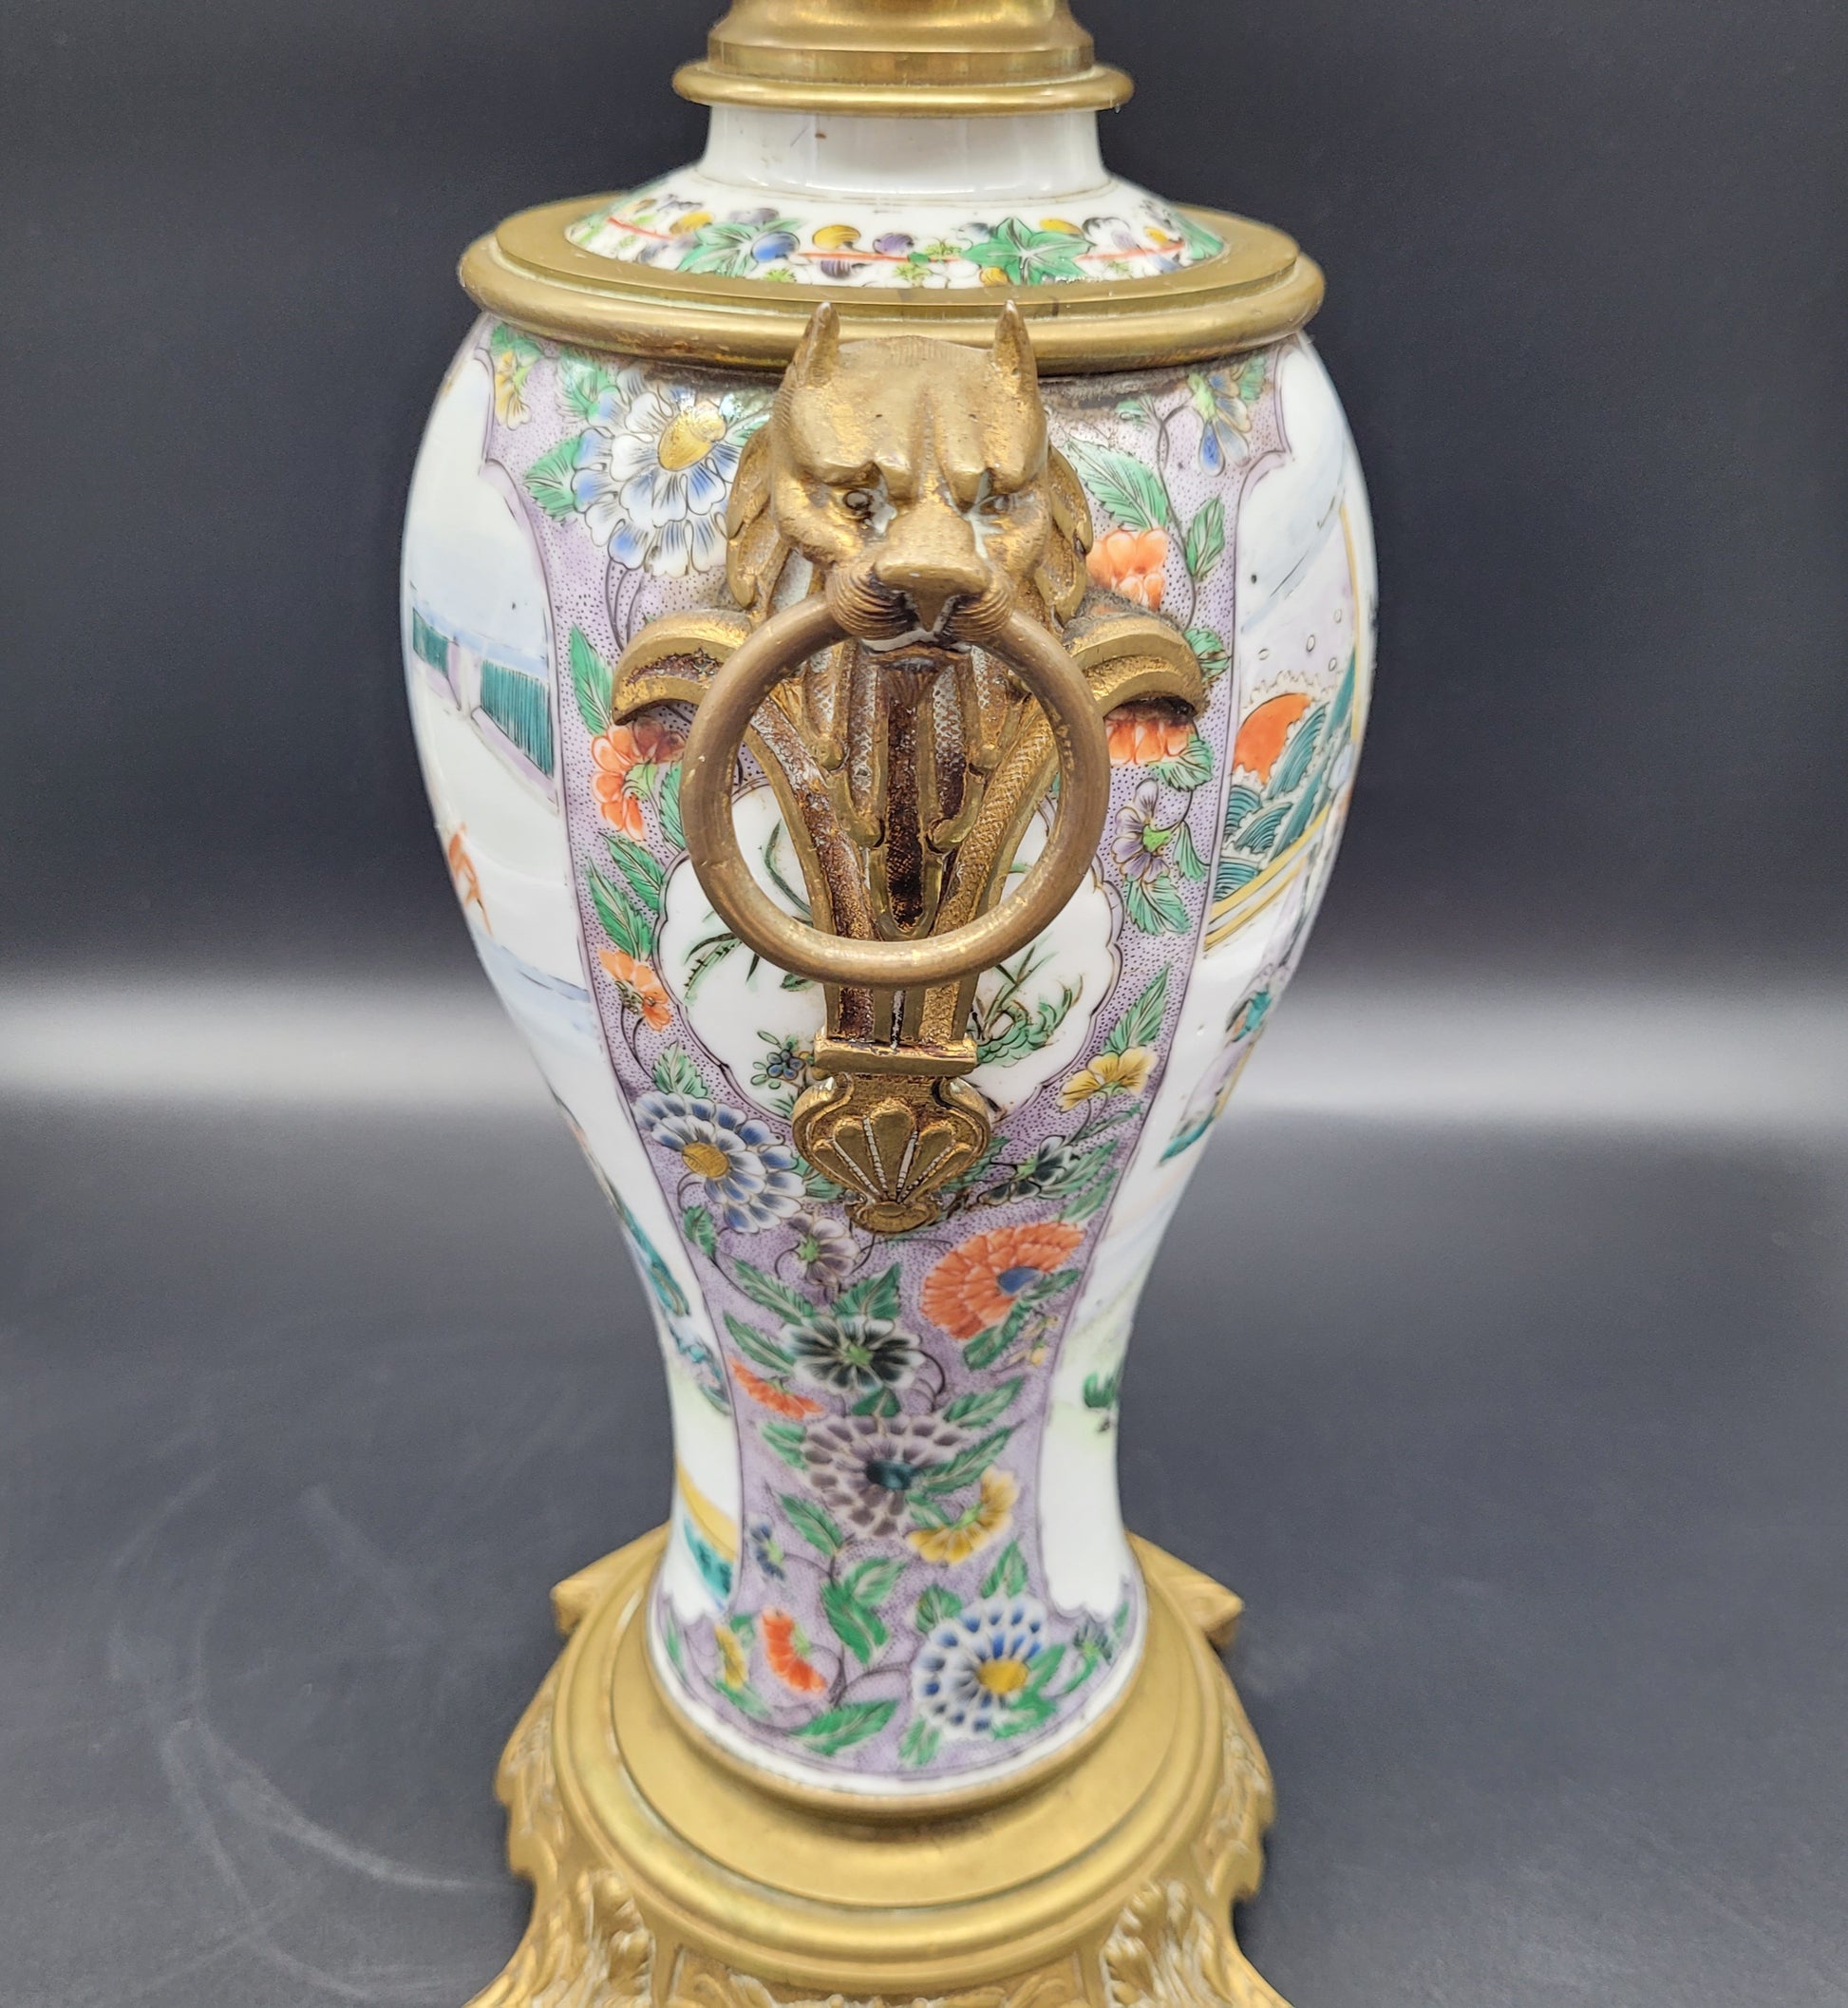 ASIAN ART CHRISTIES Beautiful Antique Chinese 18th /19th Century Famille Vert Vase With High Quality Ormolu Mounts. K.B ANTIQUES & JEWELLERY